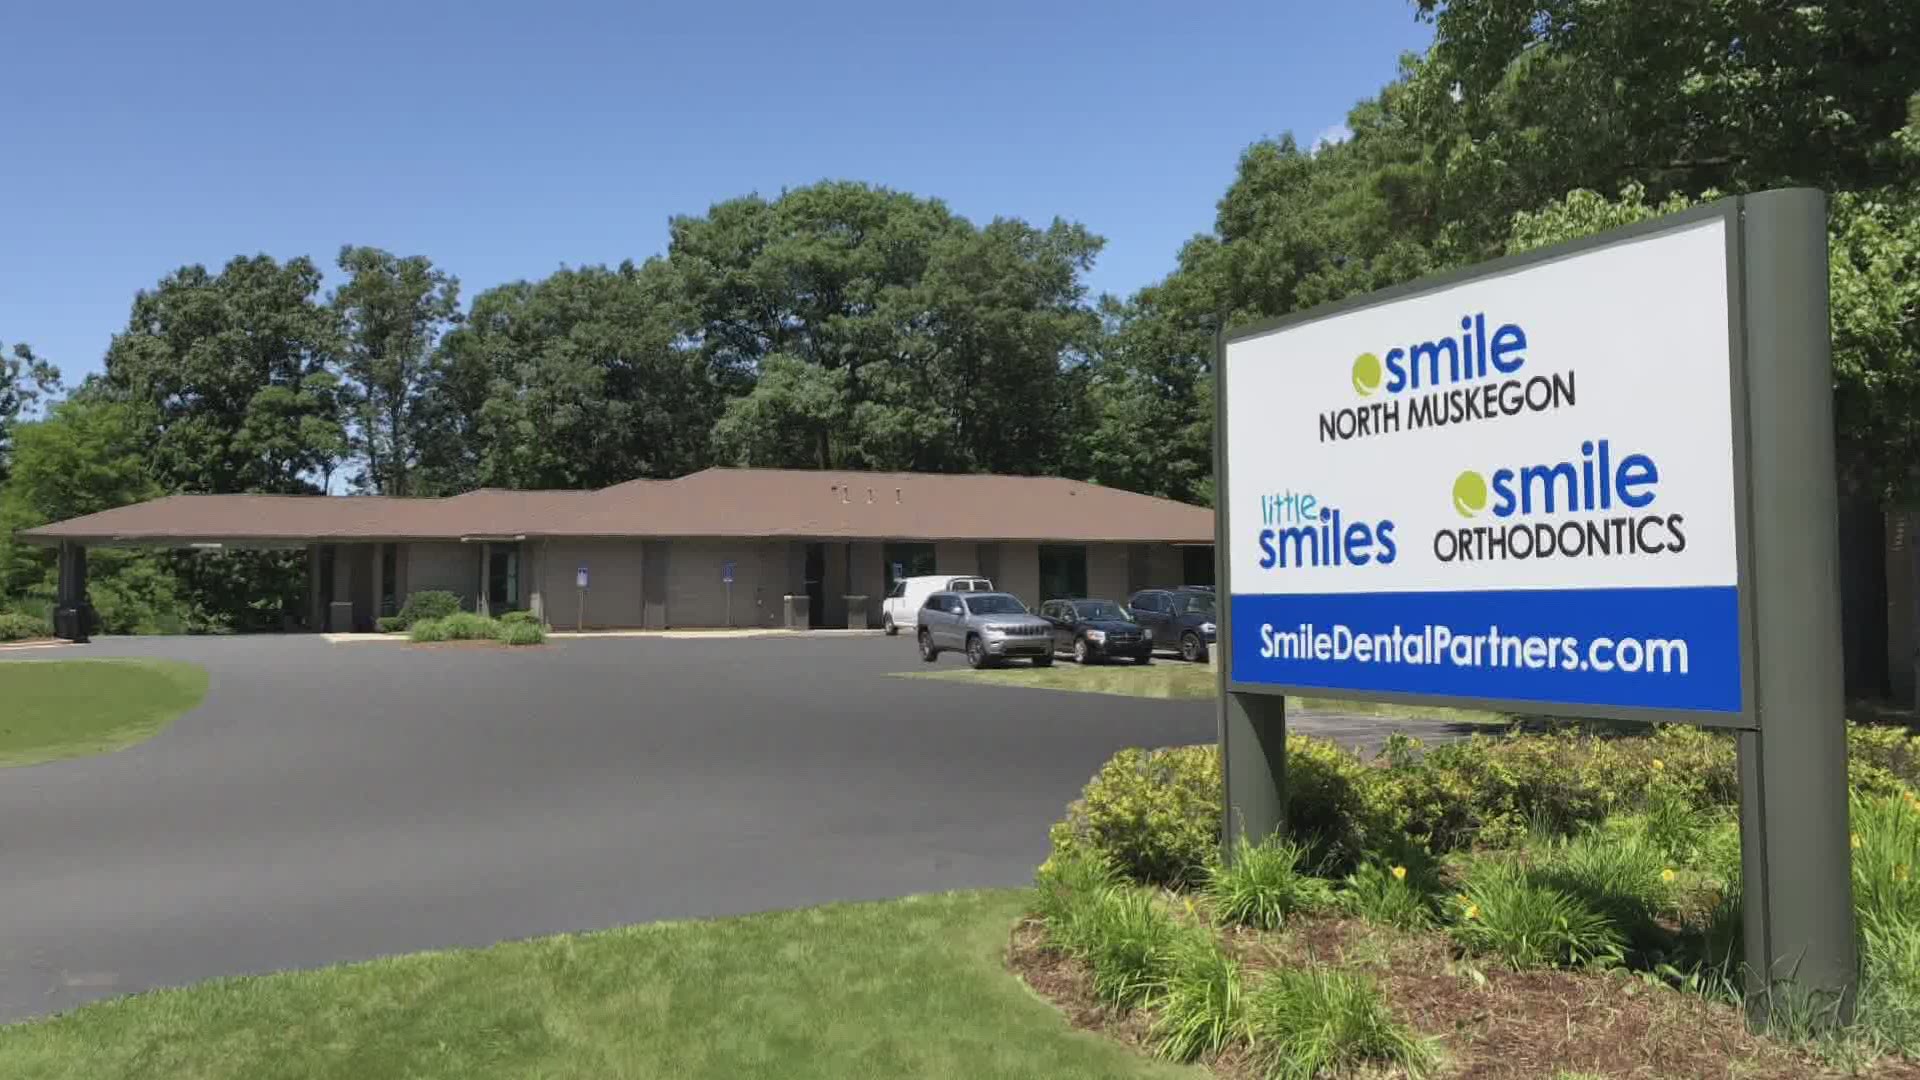 Don't fear the dentist during the COVID crisis; Smile Dental Partners has you covered